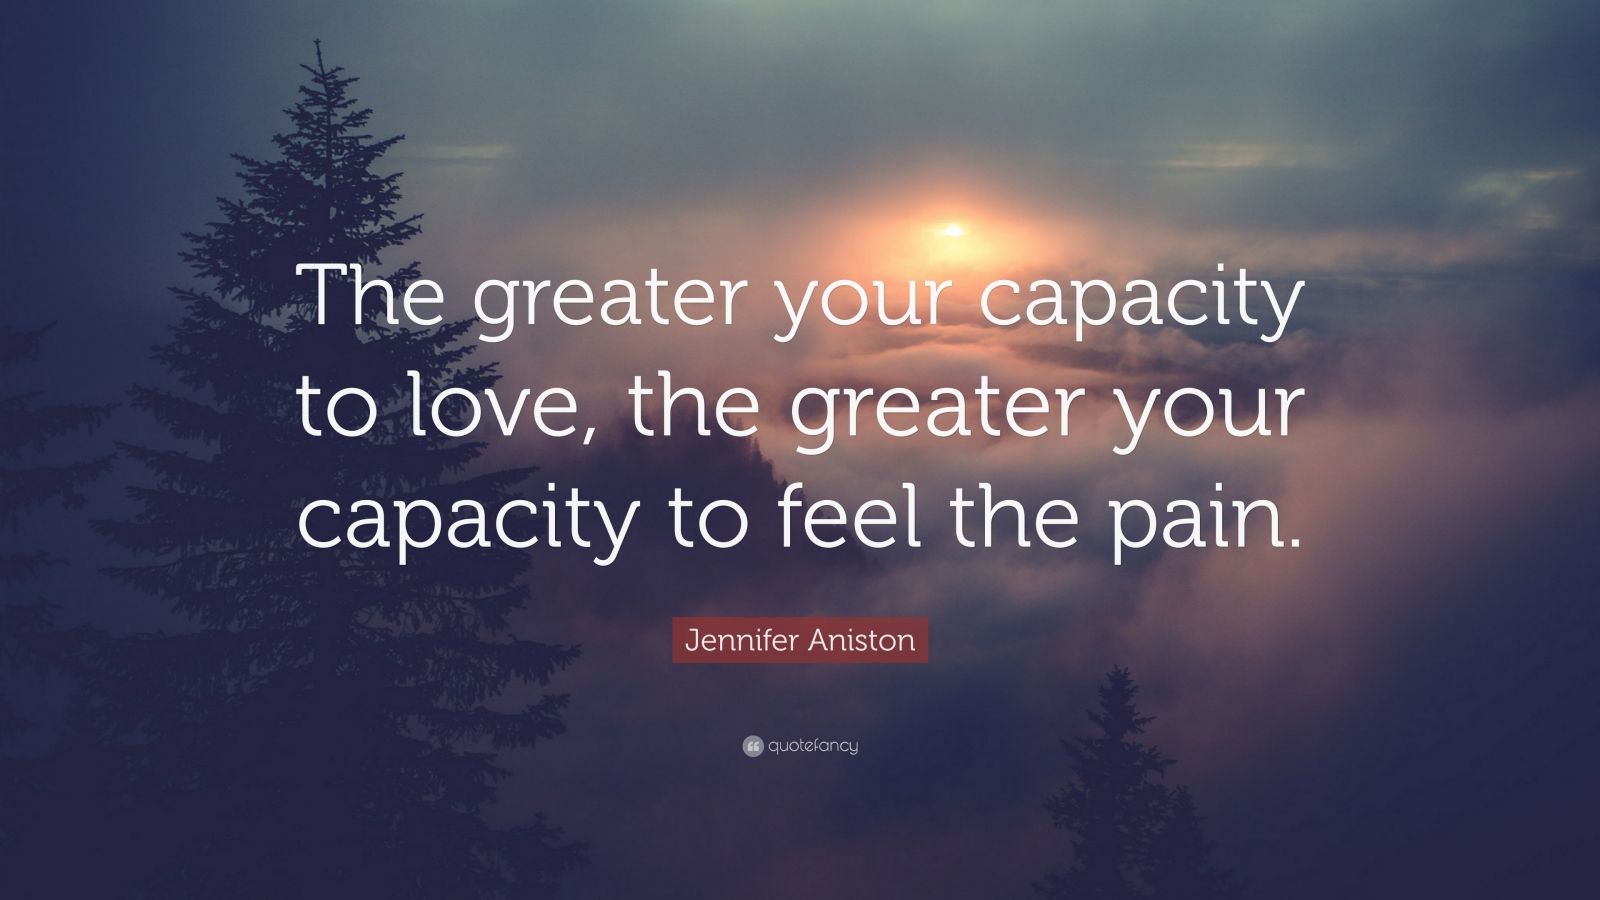 Jennifer Aniston Quote: "The greater your capacity to love, the greater your capacity to feel ...